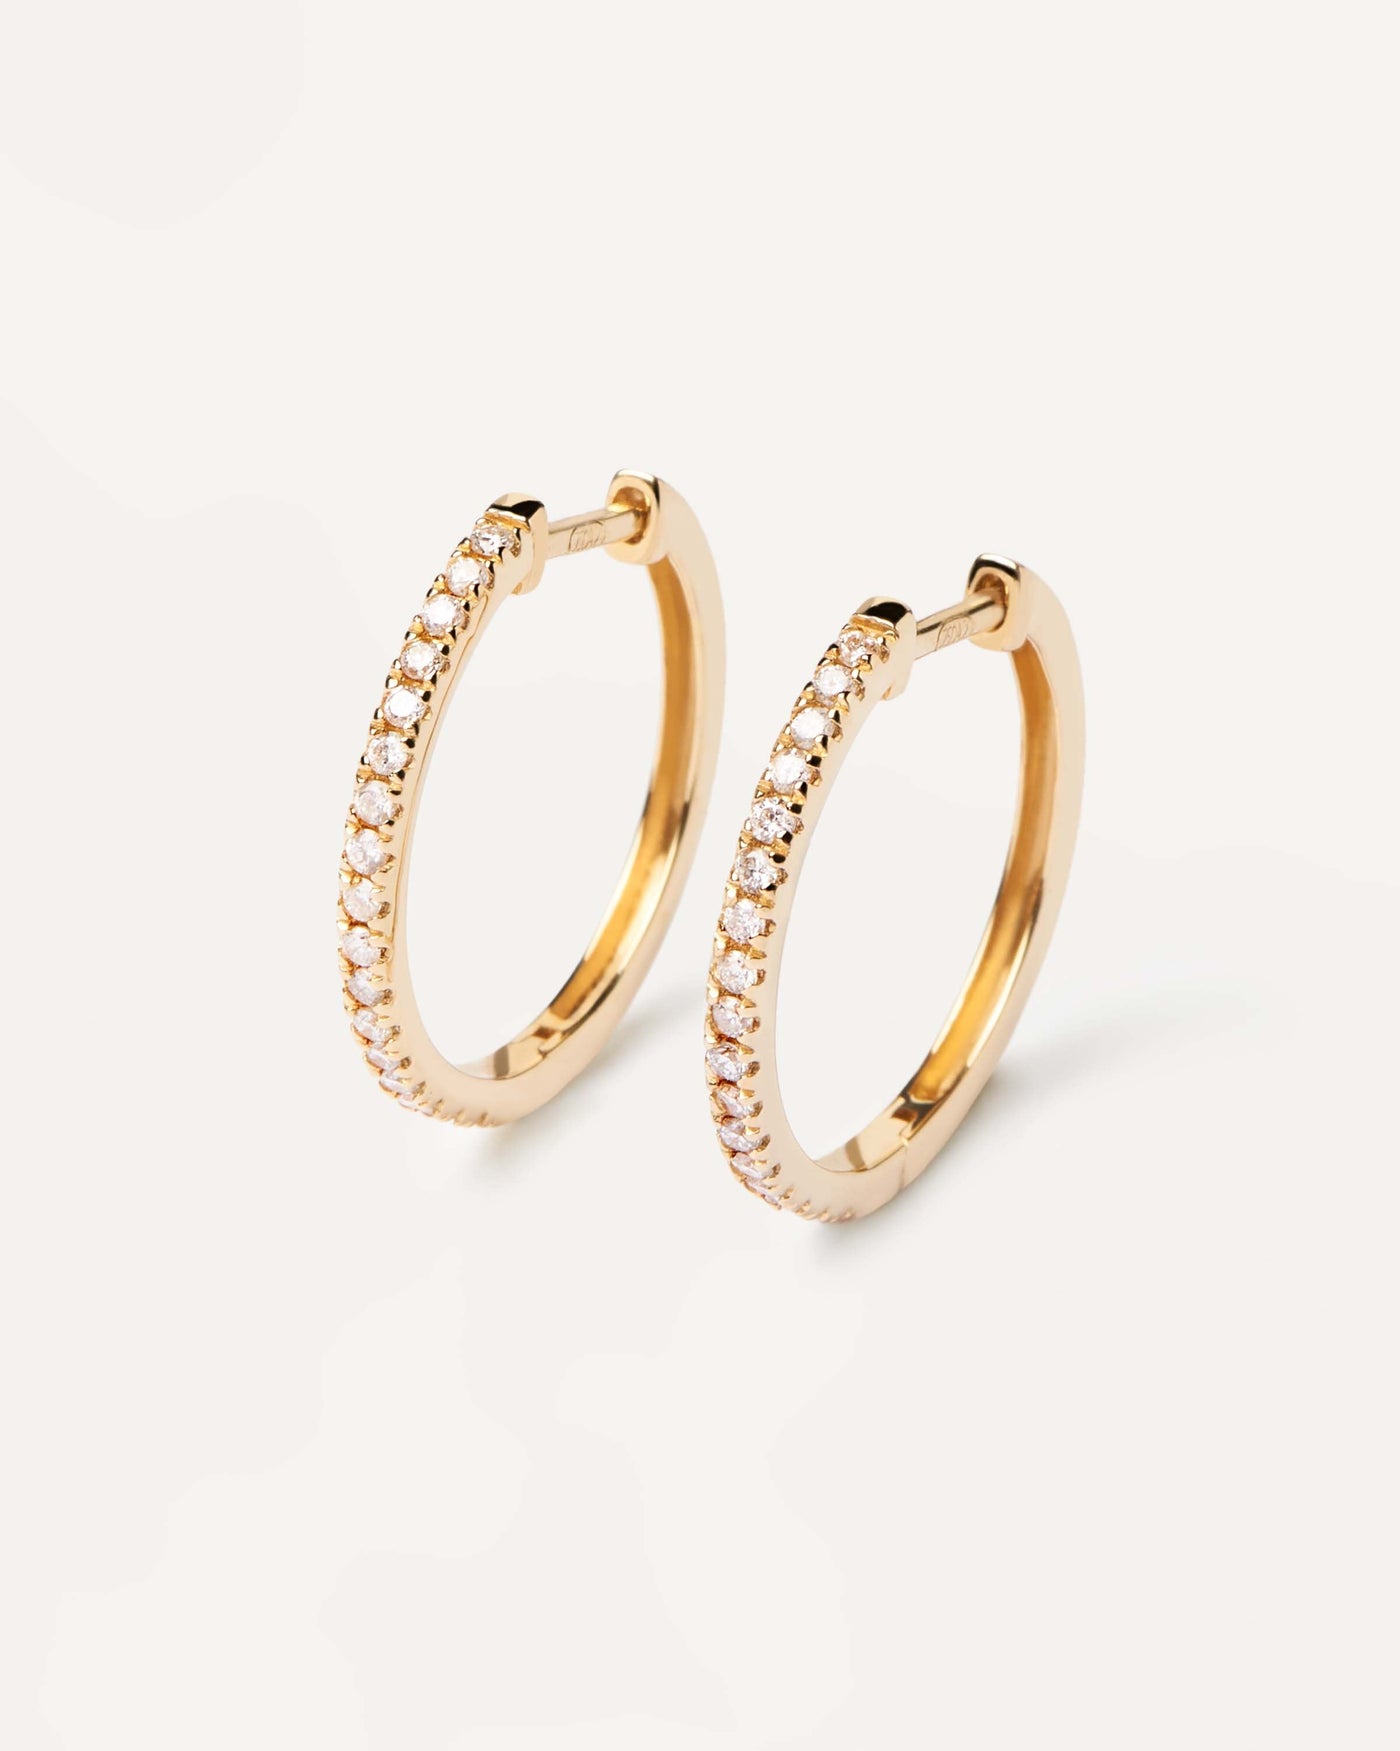 2023 Selection | Diamonds and Gold Eternity Medium Hoops. Solid yellow gold hoop earrings, set with lab-grown diamonds of 0.39 carats in total. Get the latest arrival from PDPAOLA. Place your order safely and get this Best Seller. Free Shipping.